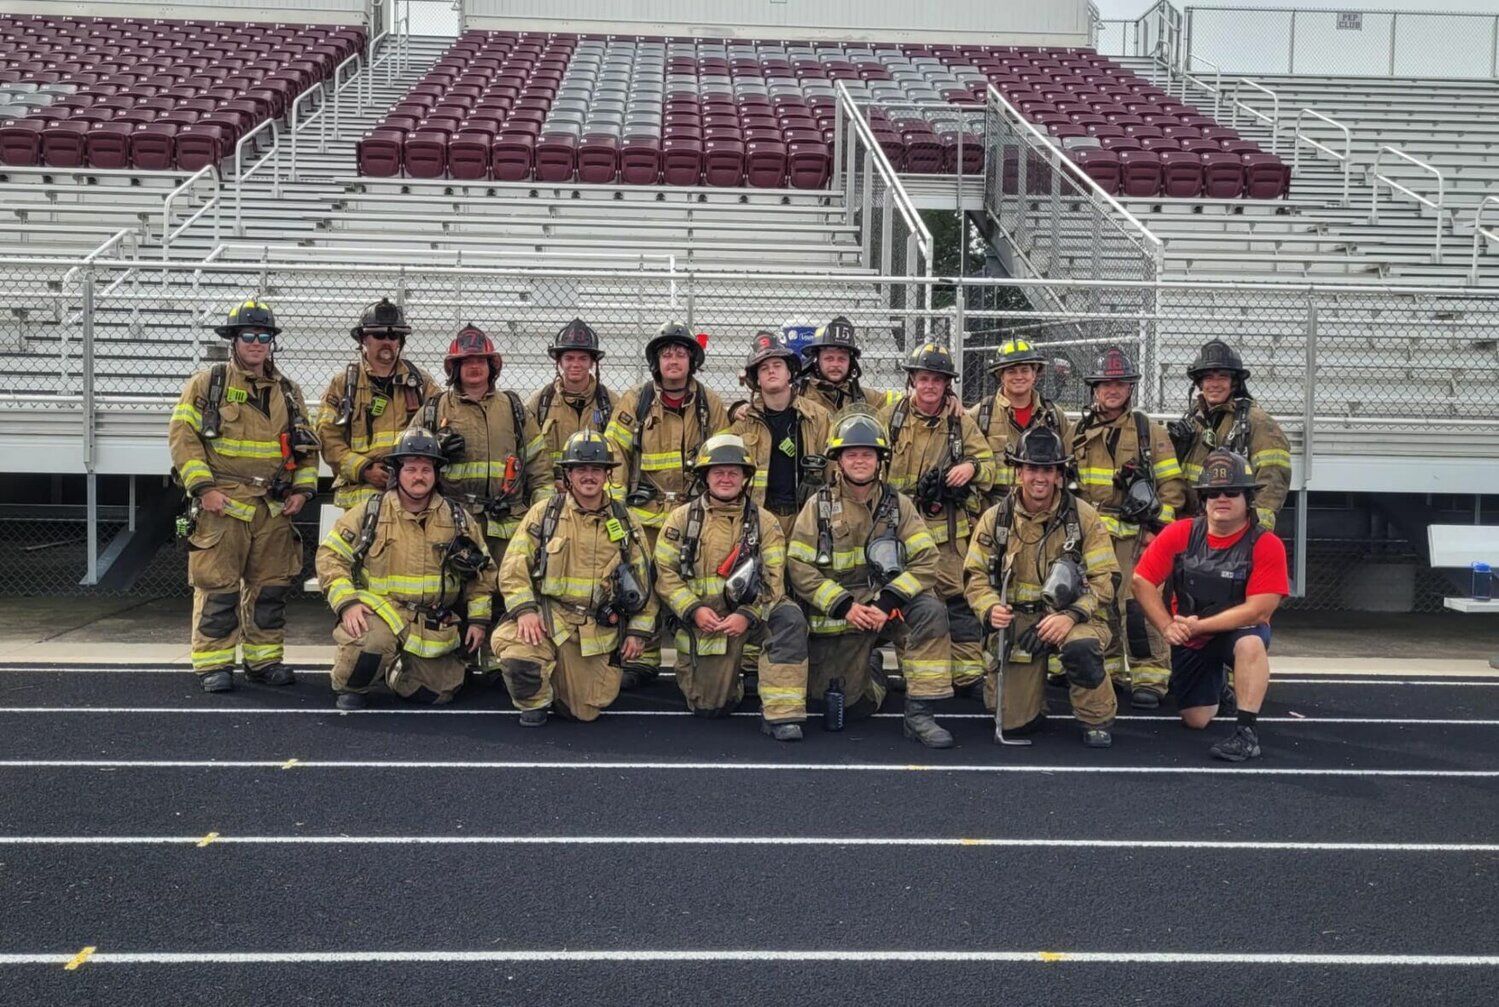 Members of the Logan-Rogersville Fire Protection District are pictured at Monday's stair clumb in remembrance of 9/11. Logan-Rogersville crews climbed 2,200 stairs – 52 trips up and down at the high school football stadium.


Contributed photos